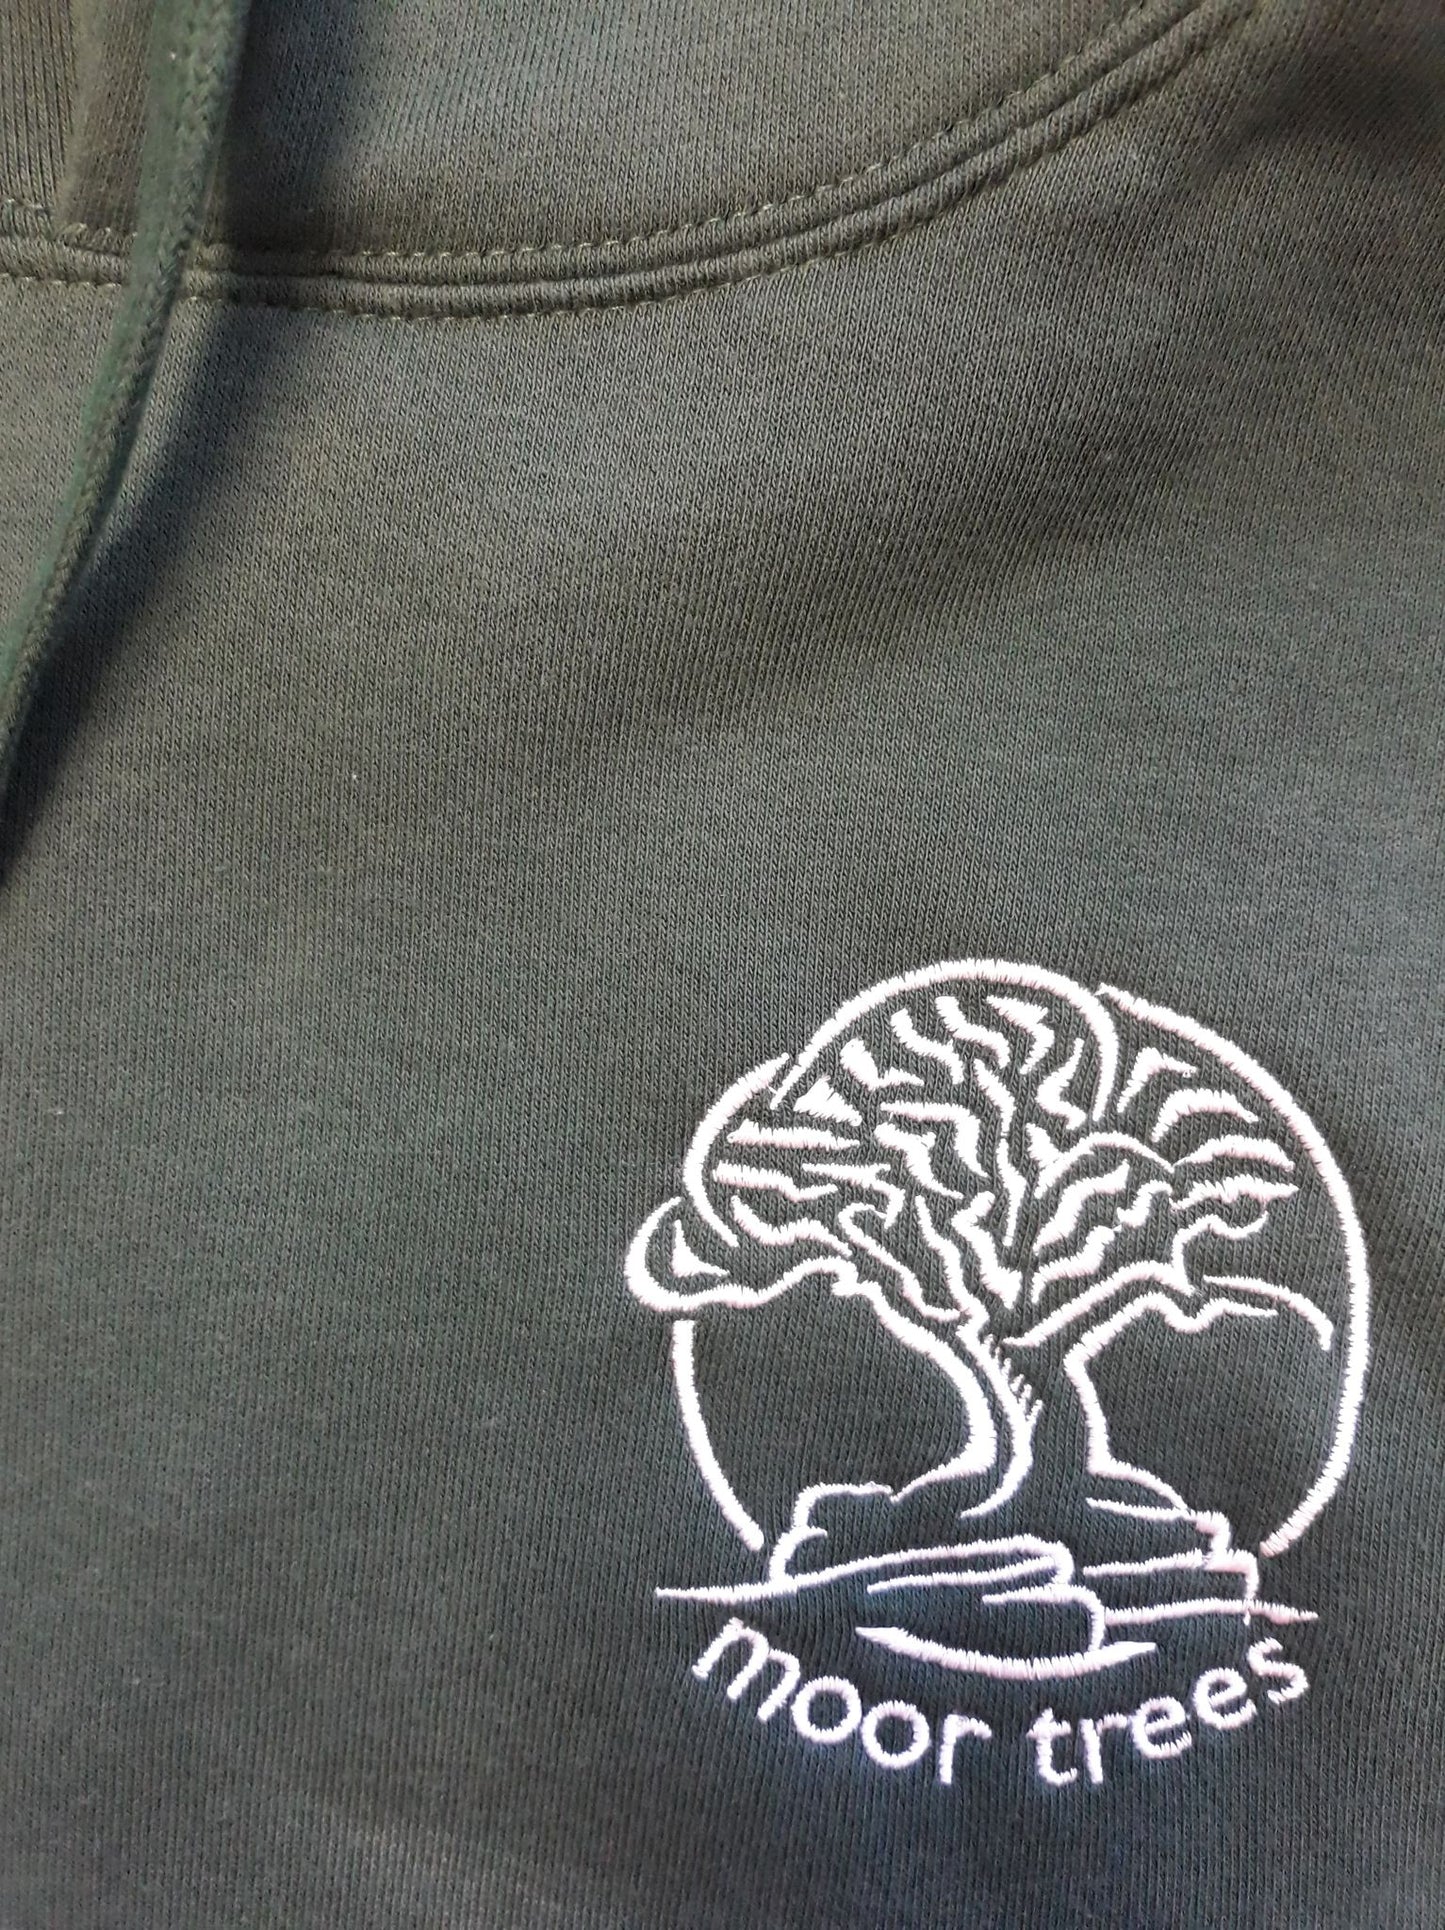 Men's hoodie with Moor Trees embroidered logo